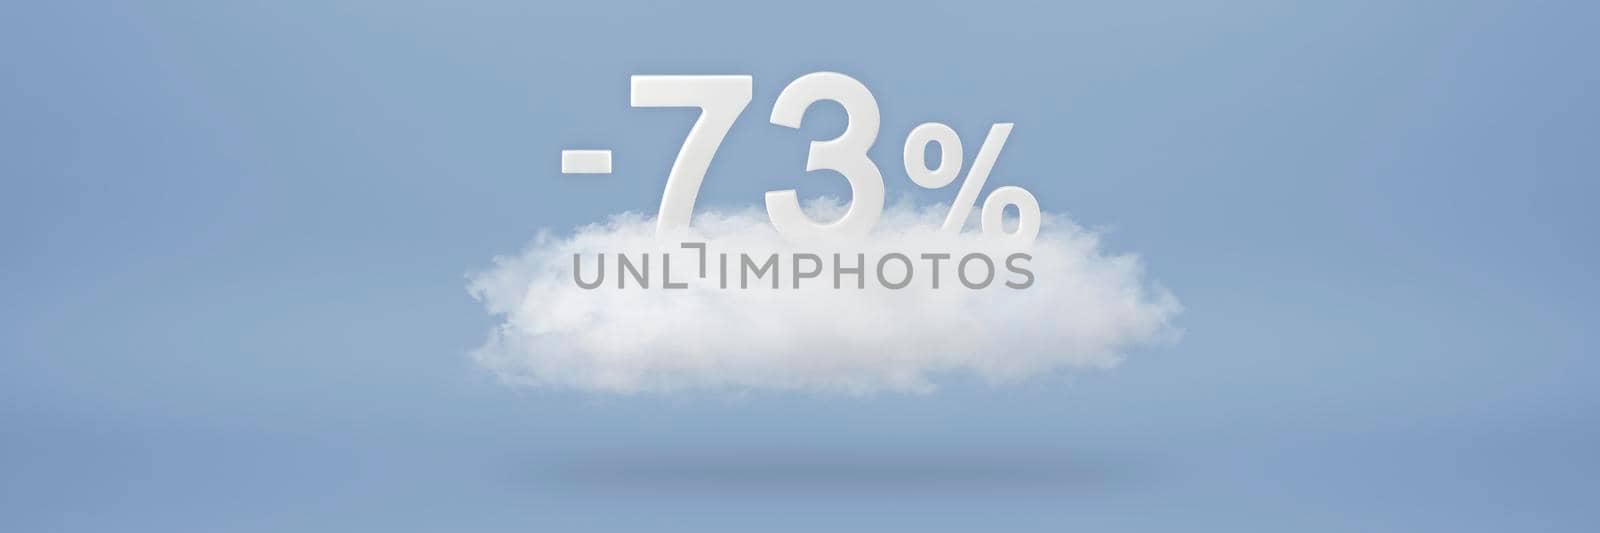 Discount 73 percent. Big discounts, sale up to seventy three percent. 3D numbers float on a cloud on a blue background. Copy space. Advertising banner and poster to be inserted into the project by SERSOL